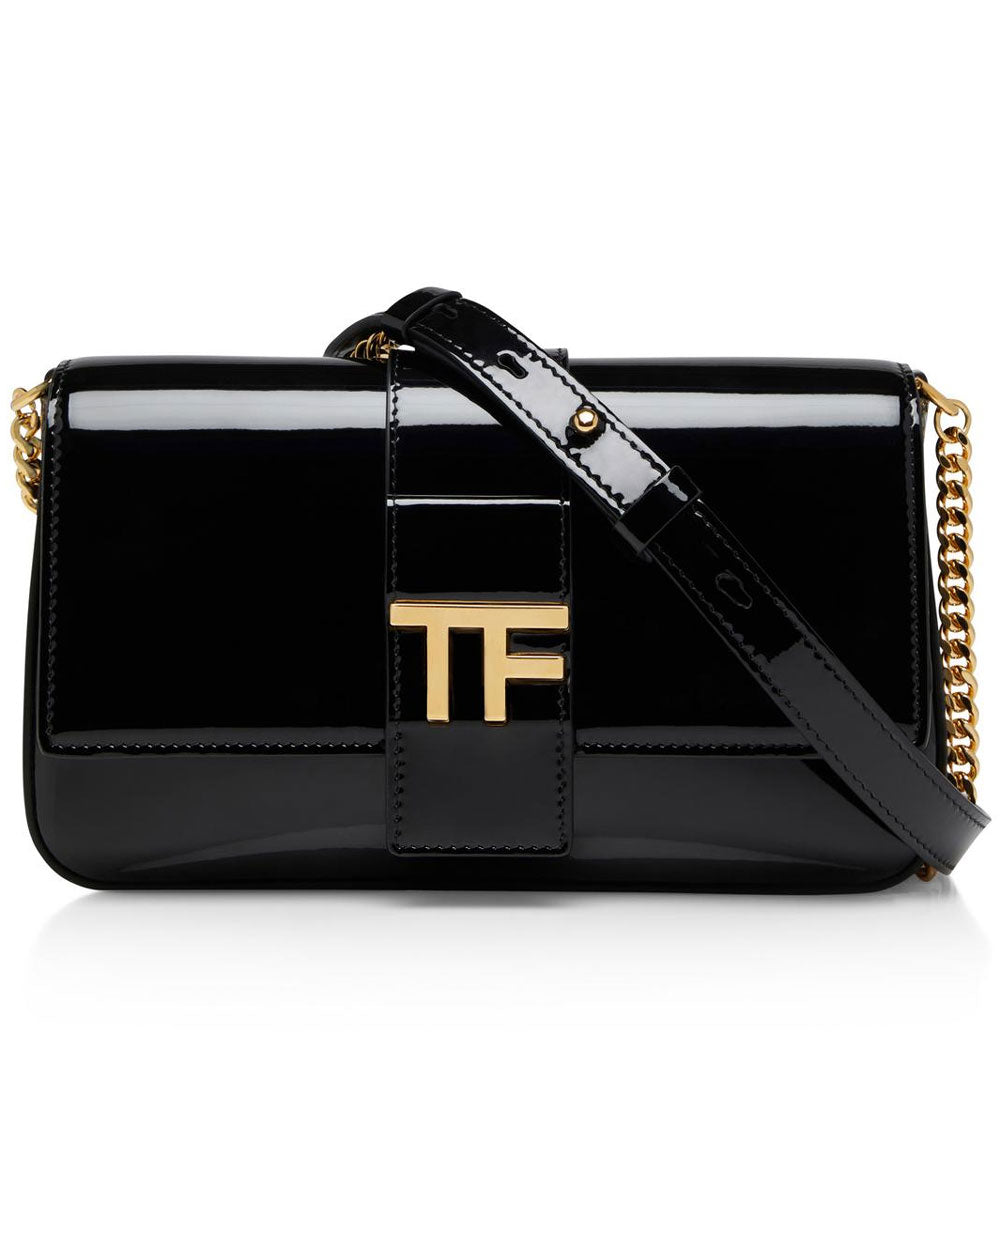 Patent Leather TF Chain Shoulder Bag in Black